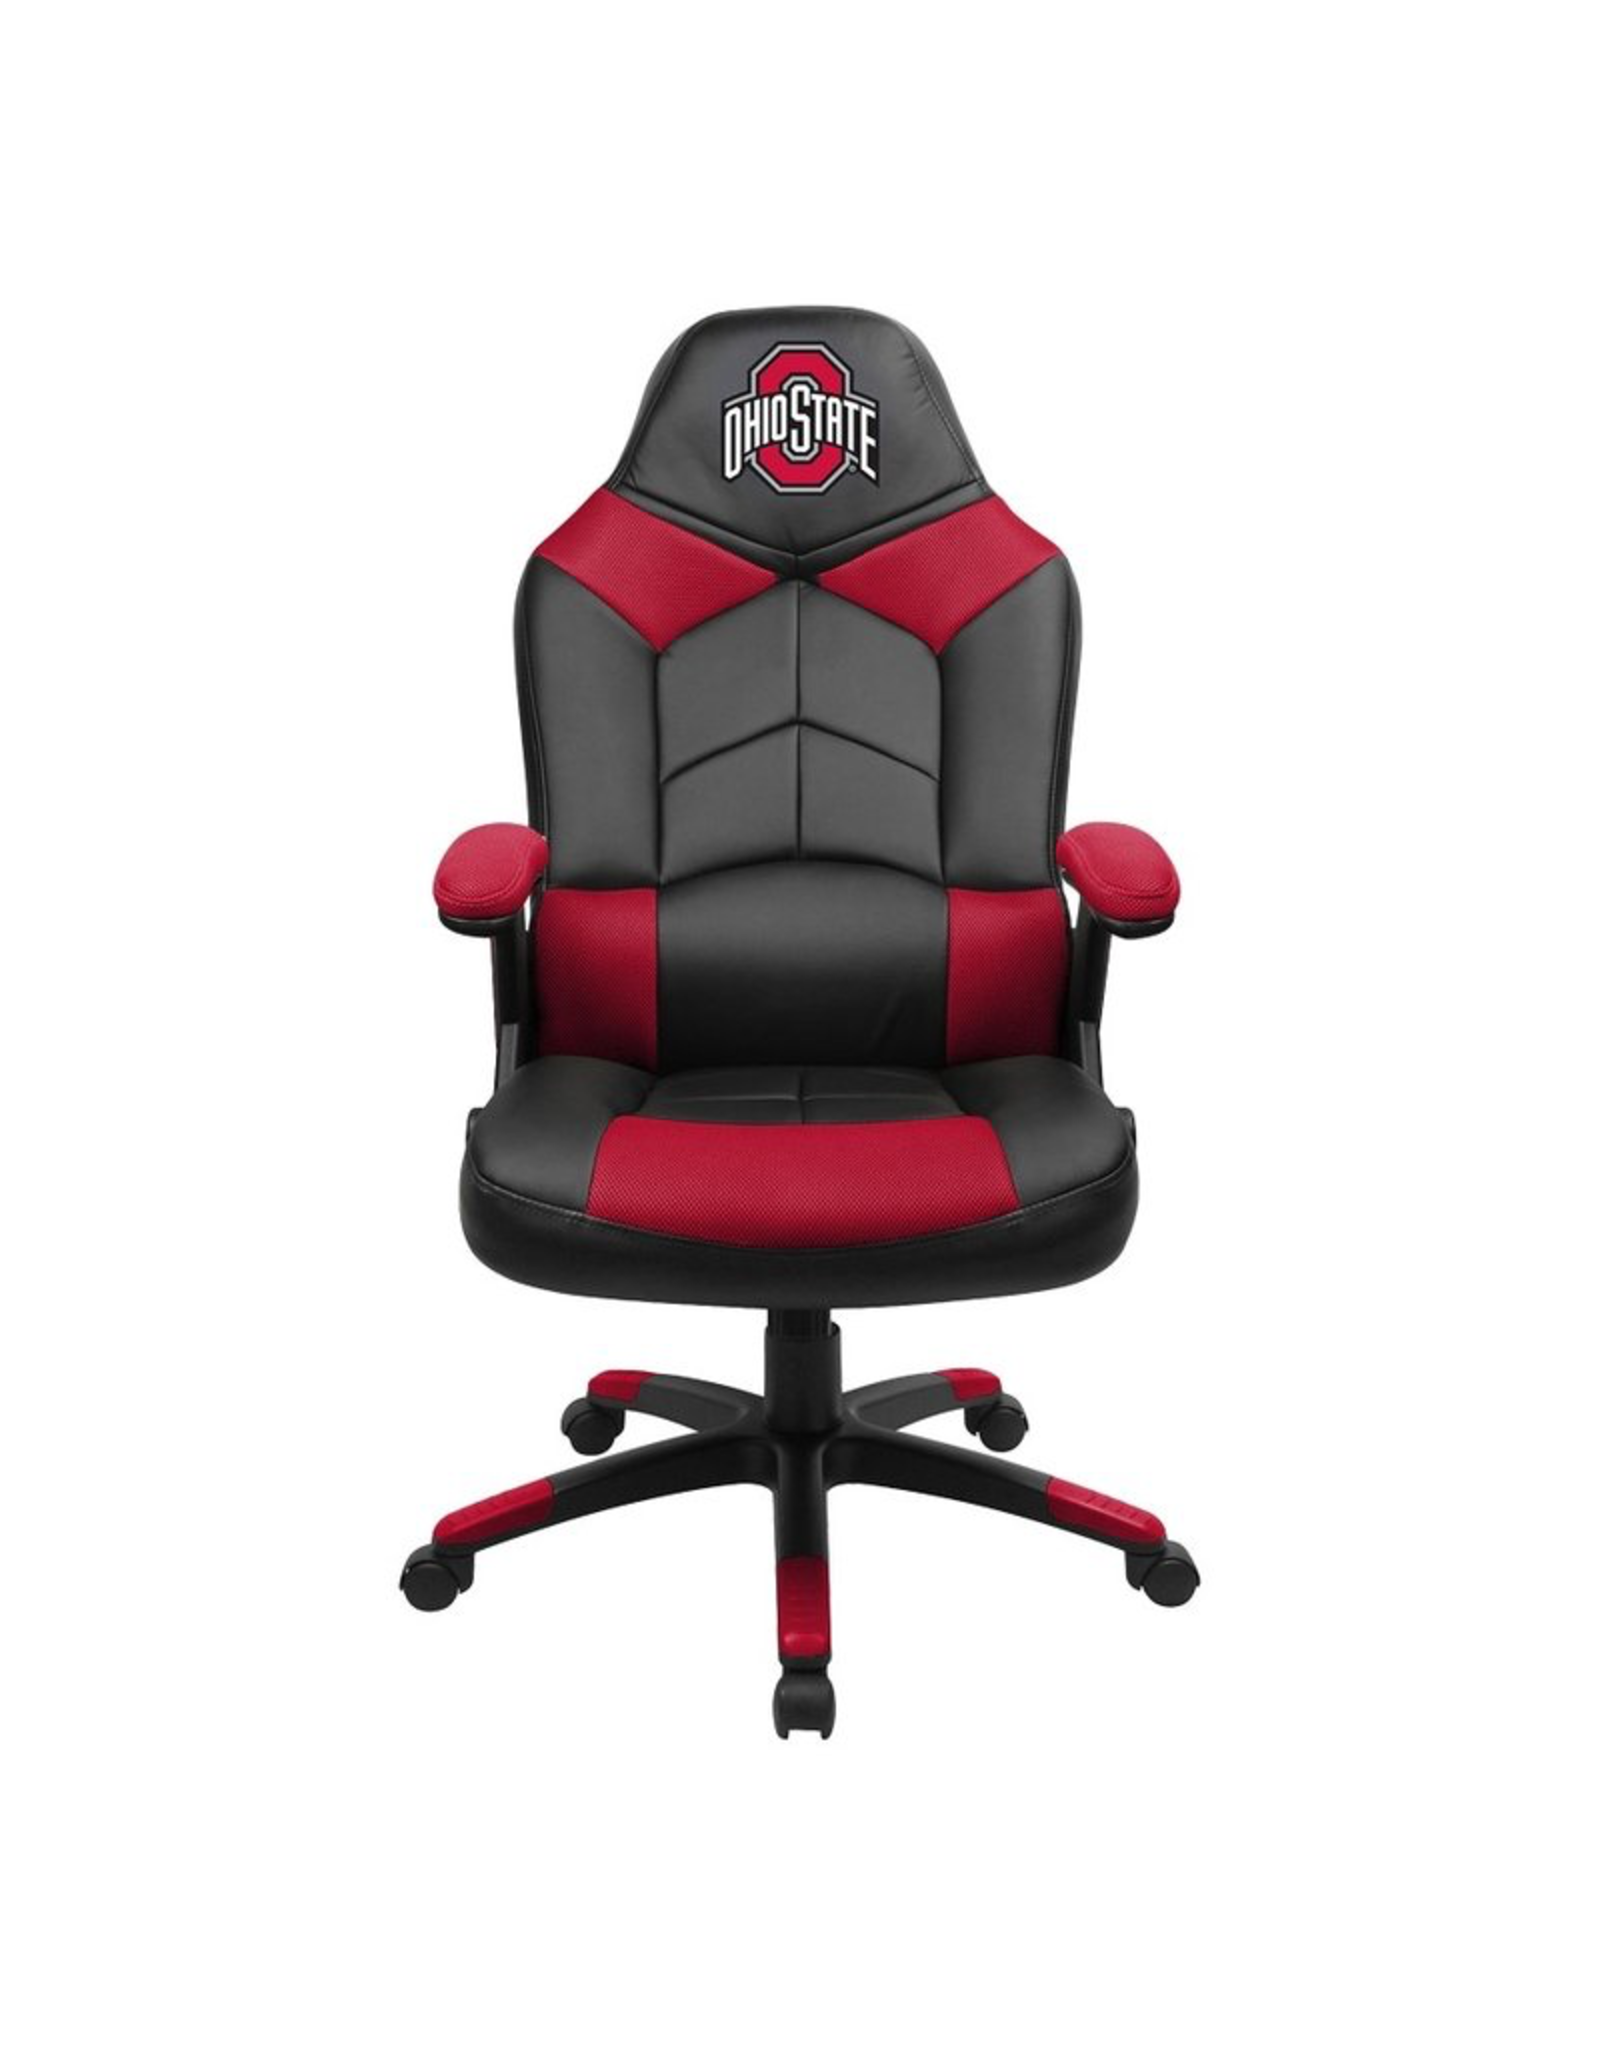 Imperial Ohio State Buckeyes Gaming / Office Chair